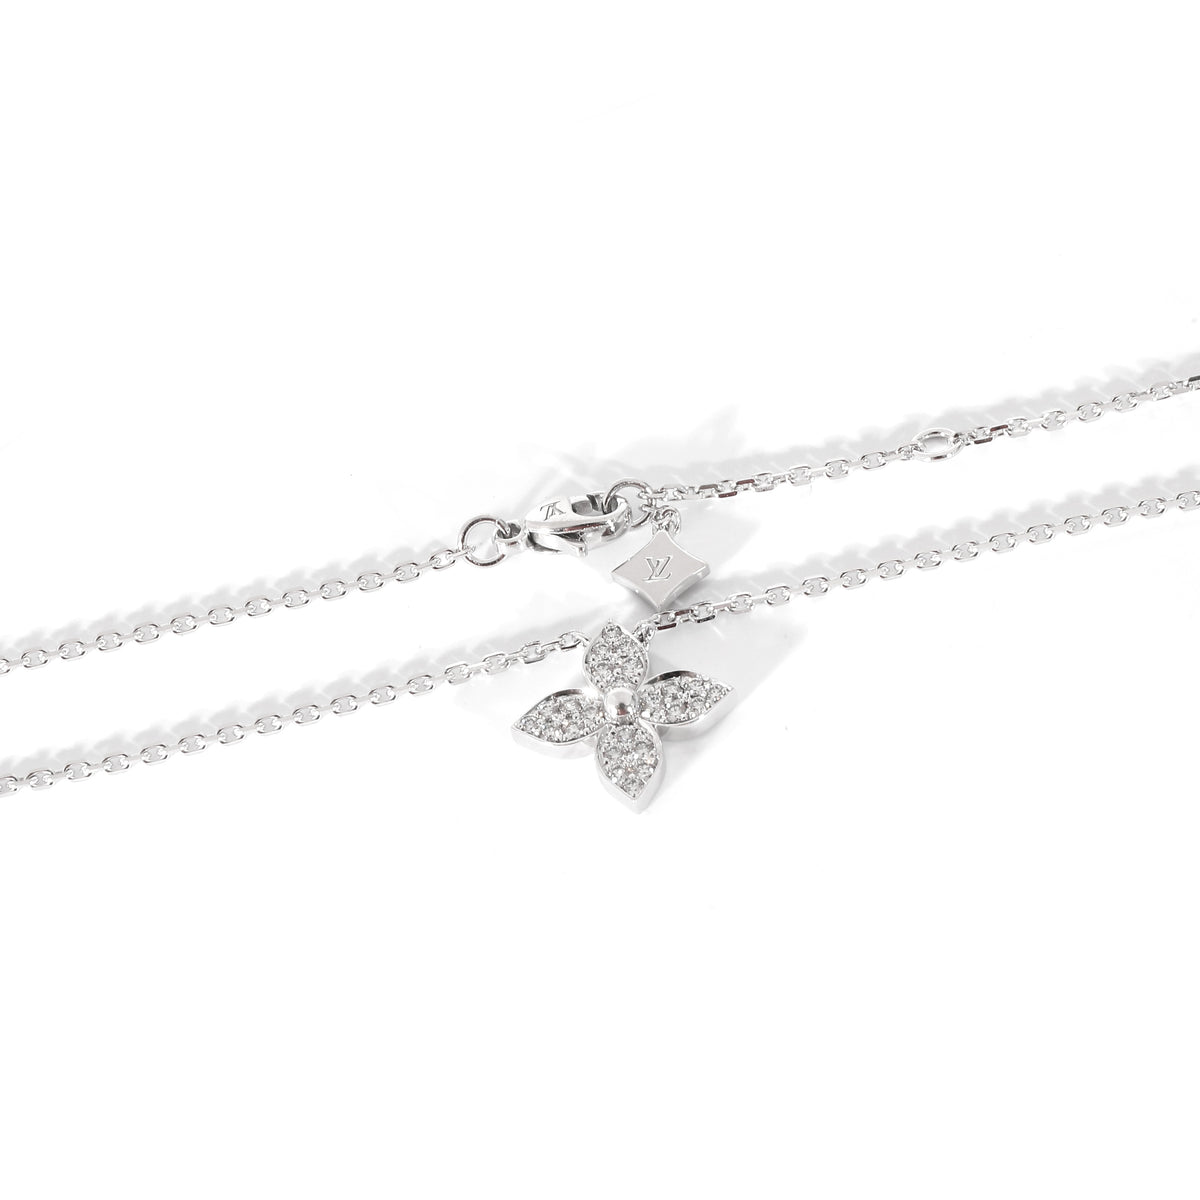 Louis Vuitton Idylle Blossom Necklace in 18k White Gold 0.2 CTW